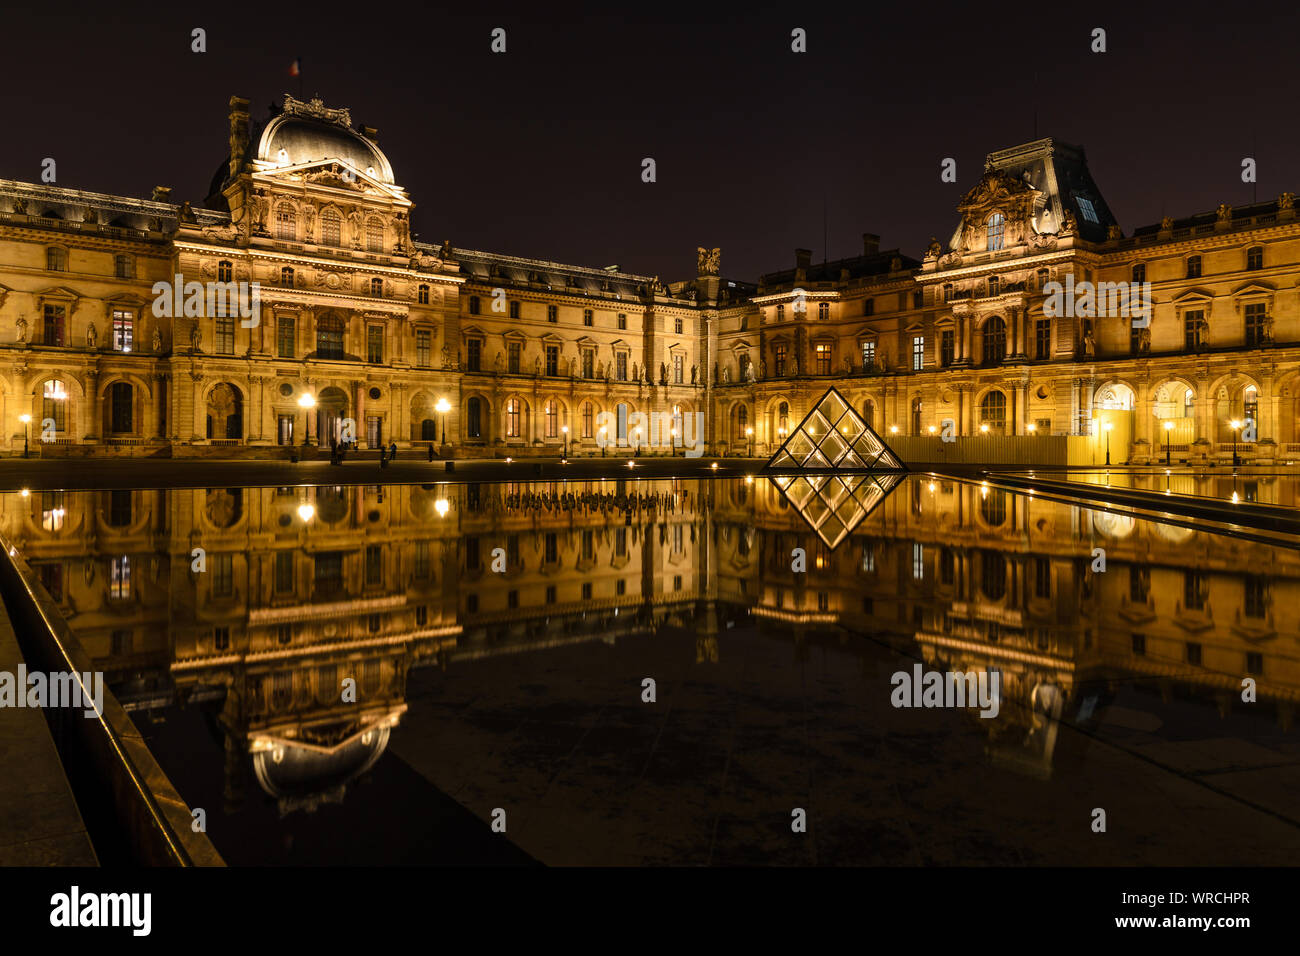 PARIS, FRANCE - DECEMBER 3, 2013: Night view of the Louvre Museum reflected on the water of a basin. Stock Photo